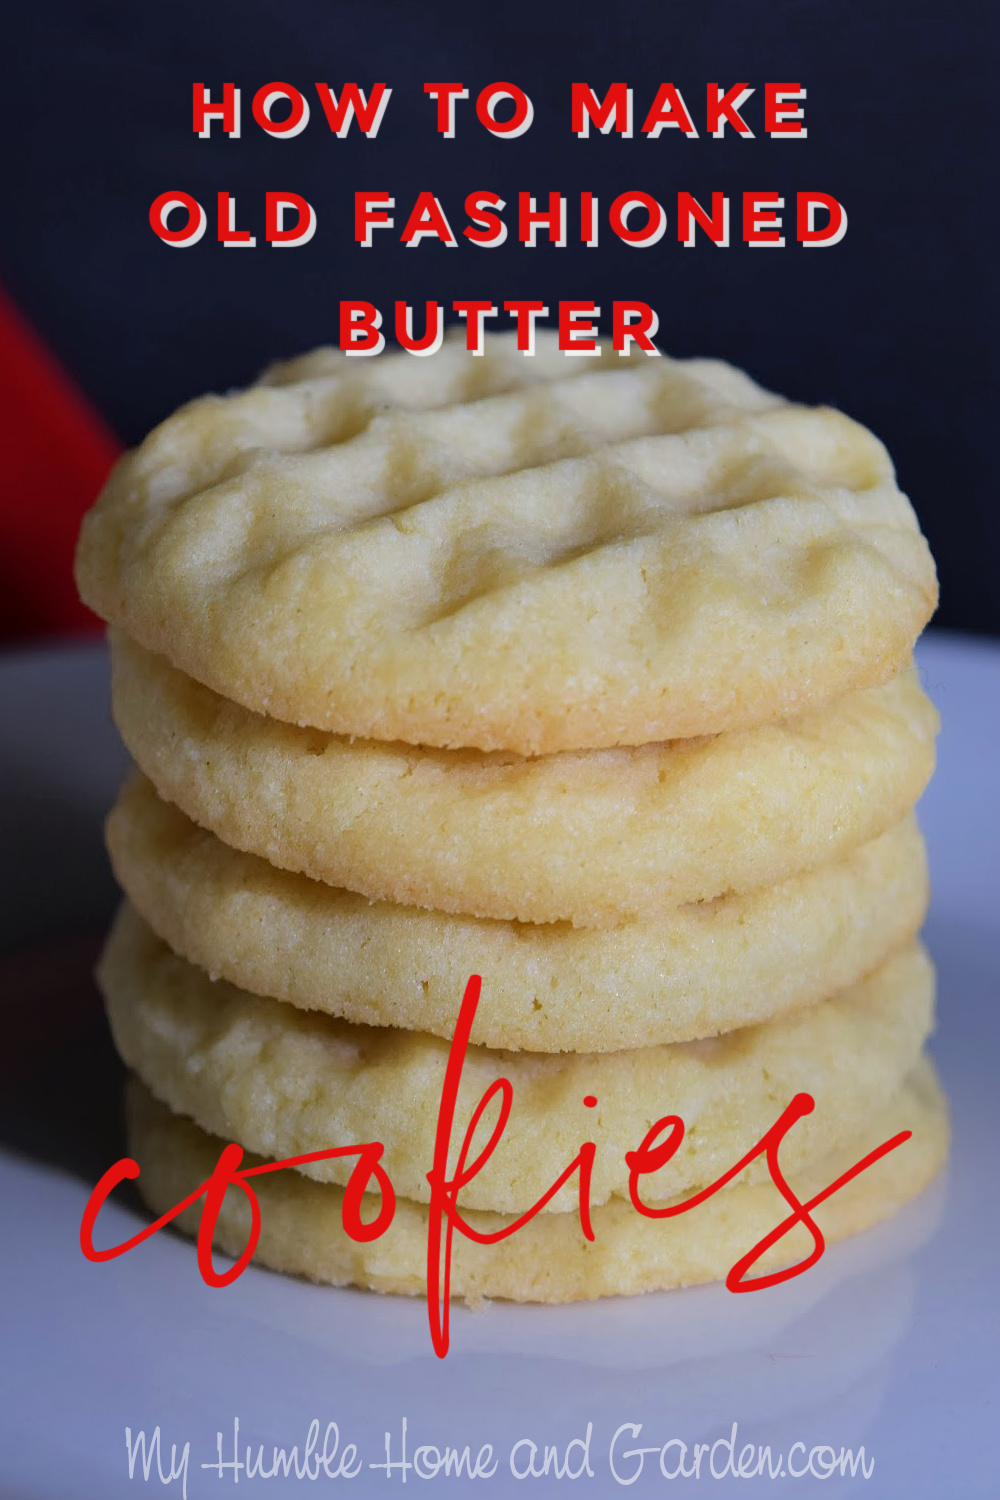 https://myhumblehomeandgarden.com/wp-content/uploads/2021/01/How-To-Make-Old-Fashioned-Butter-Cookies.jpg